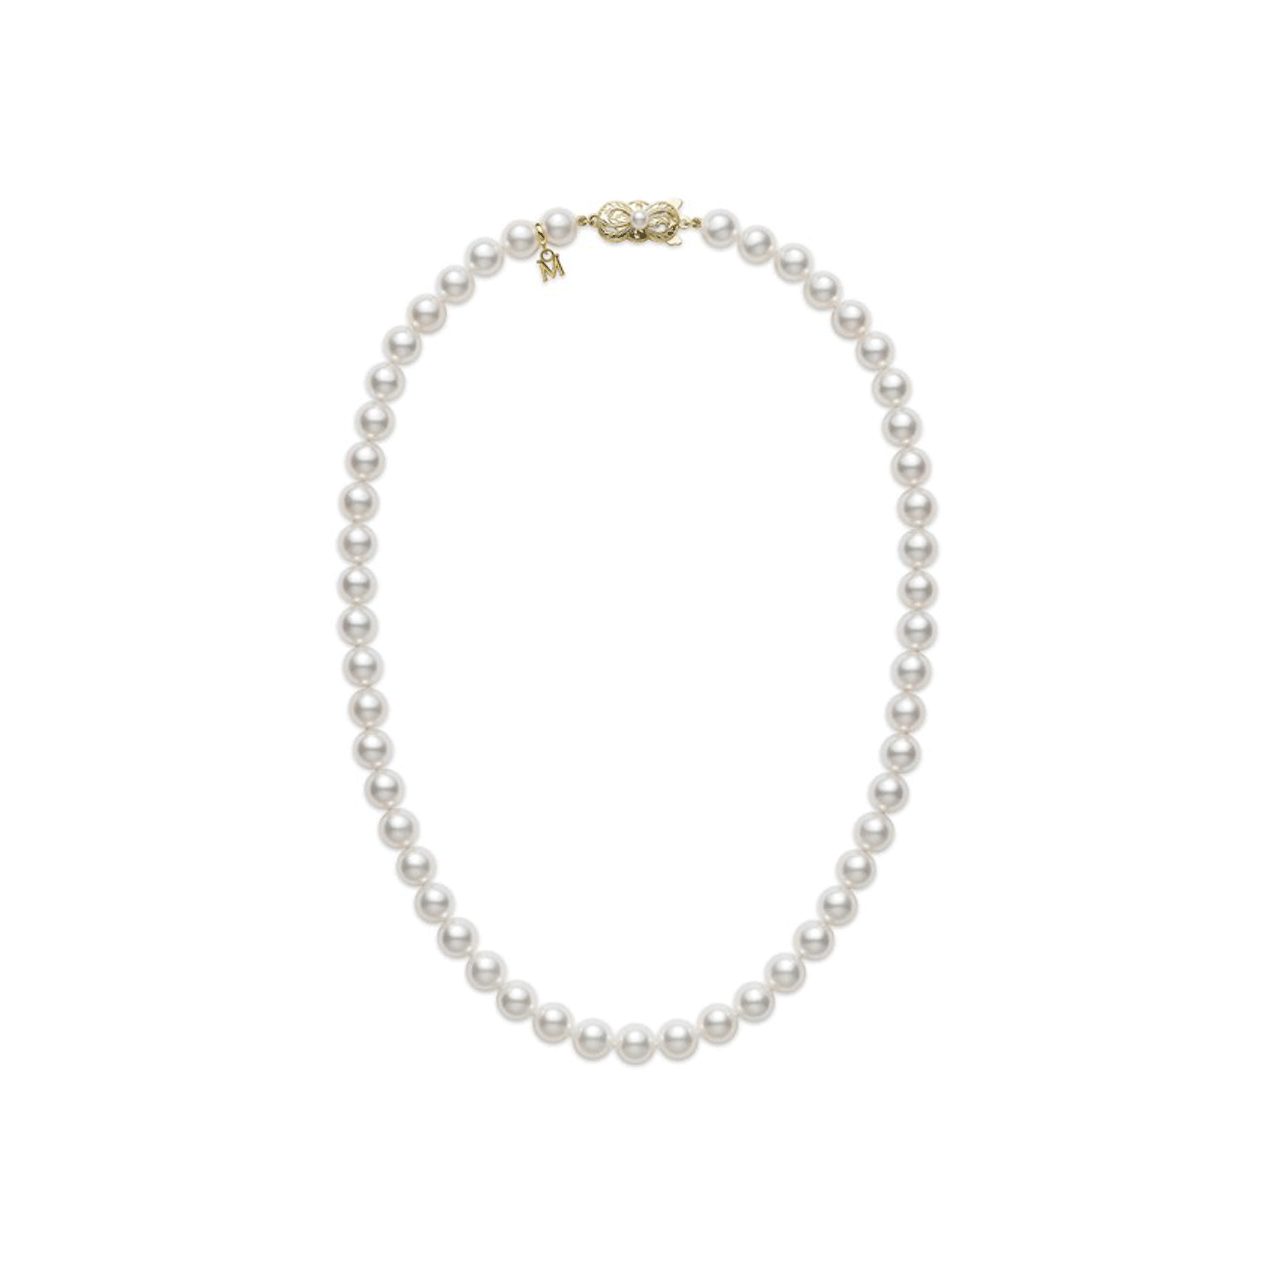 Mikimoto 18k Yellow Gold and Pearl Necklace